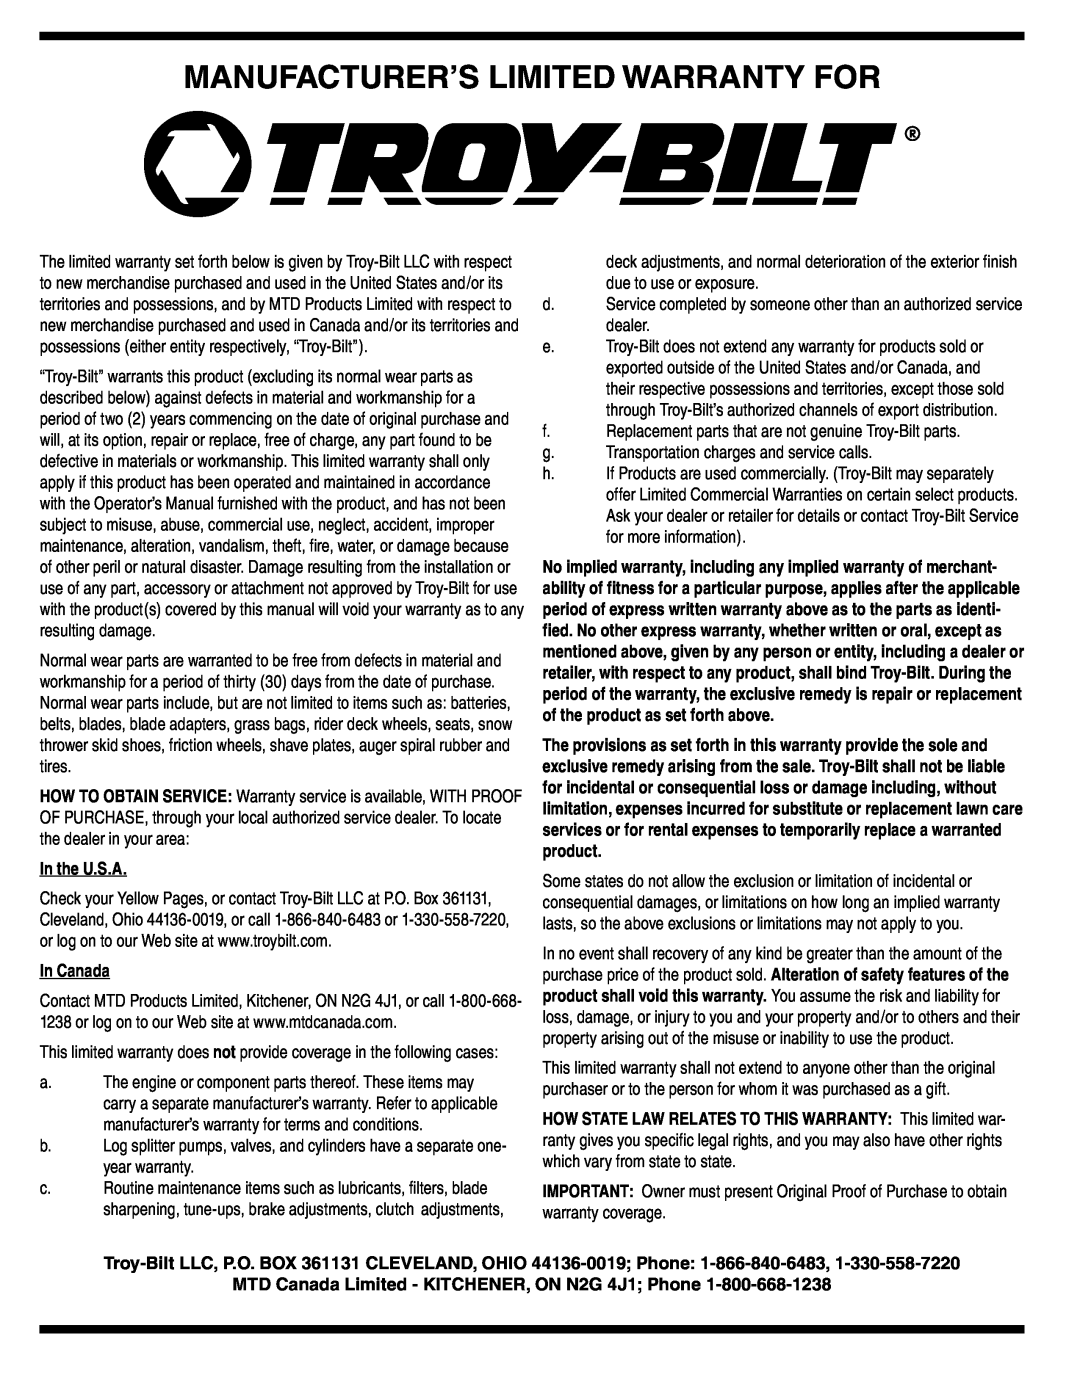 Troy-Bilt STORM Series warranty Manufacturer’S Limited Warranty For, In the U.S.A, In Canada 